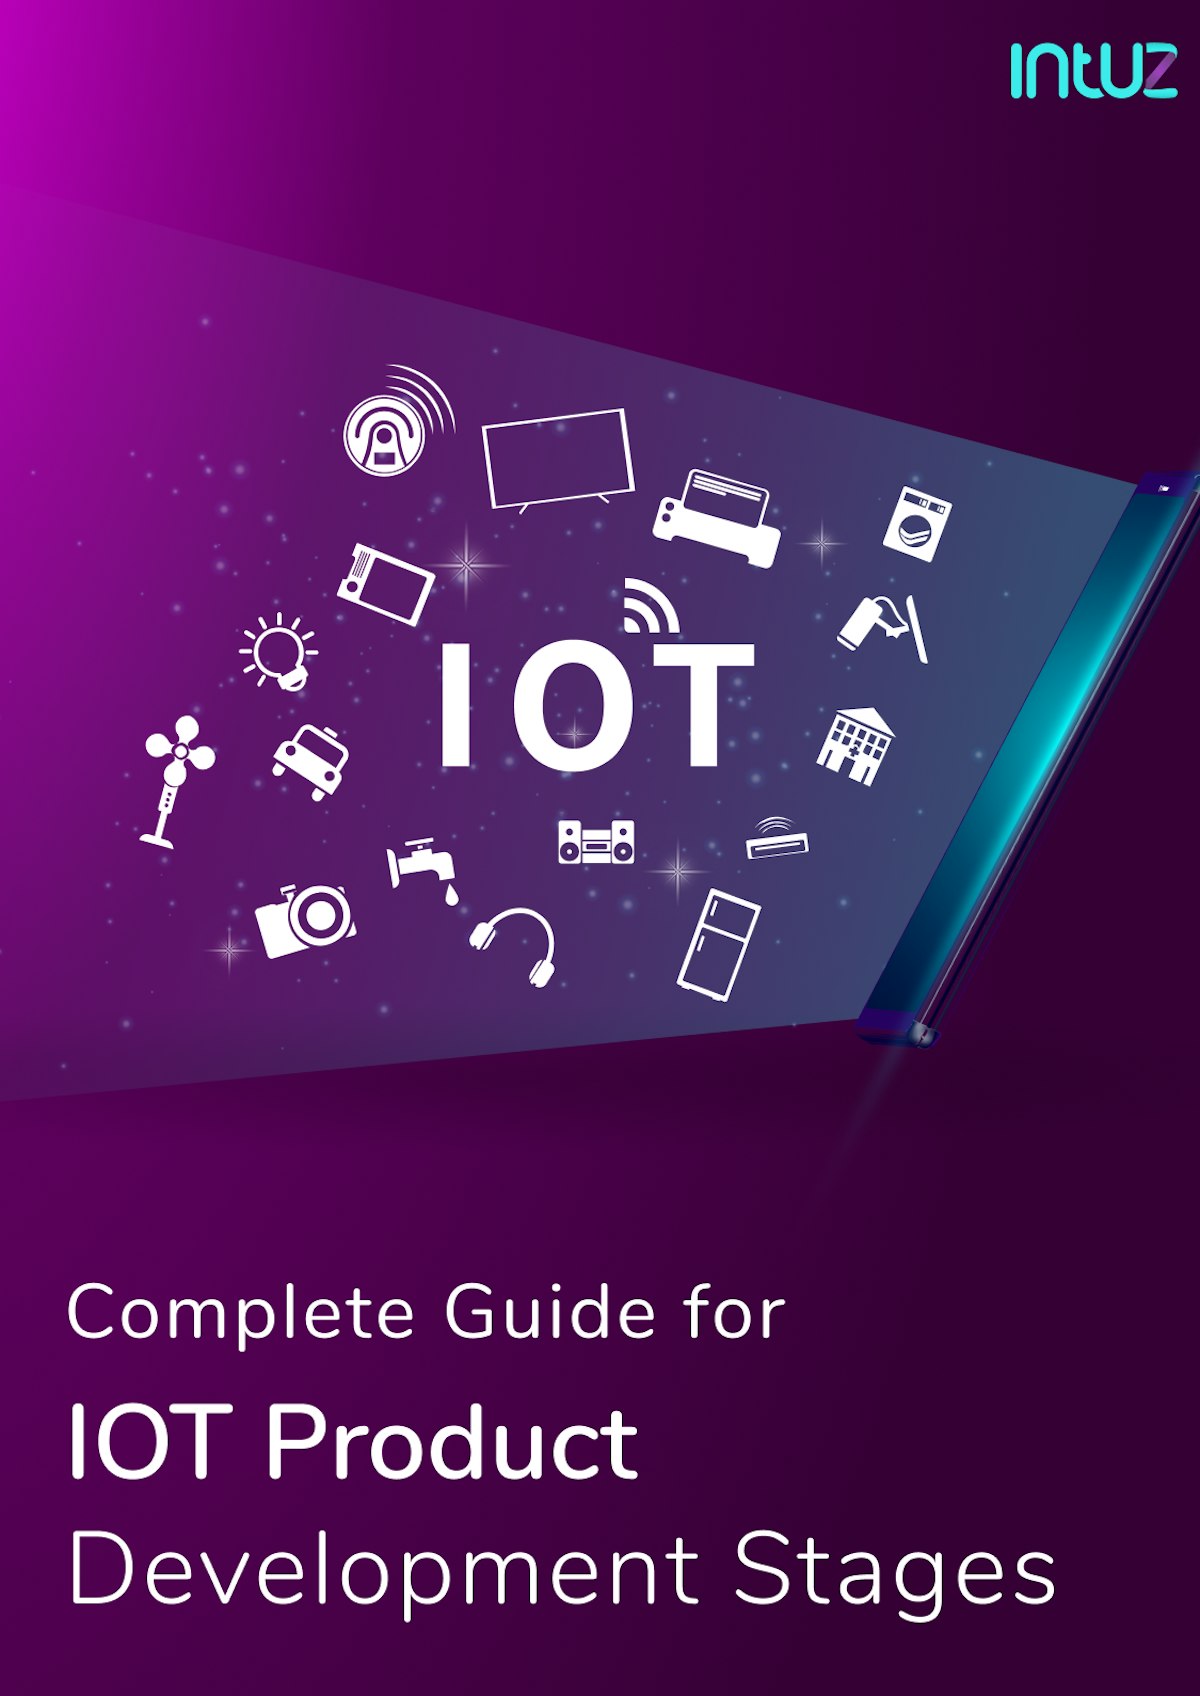 IoT product development guide 